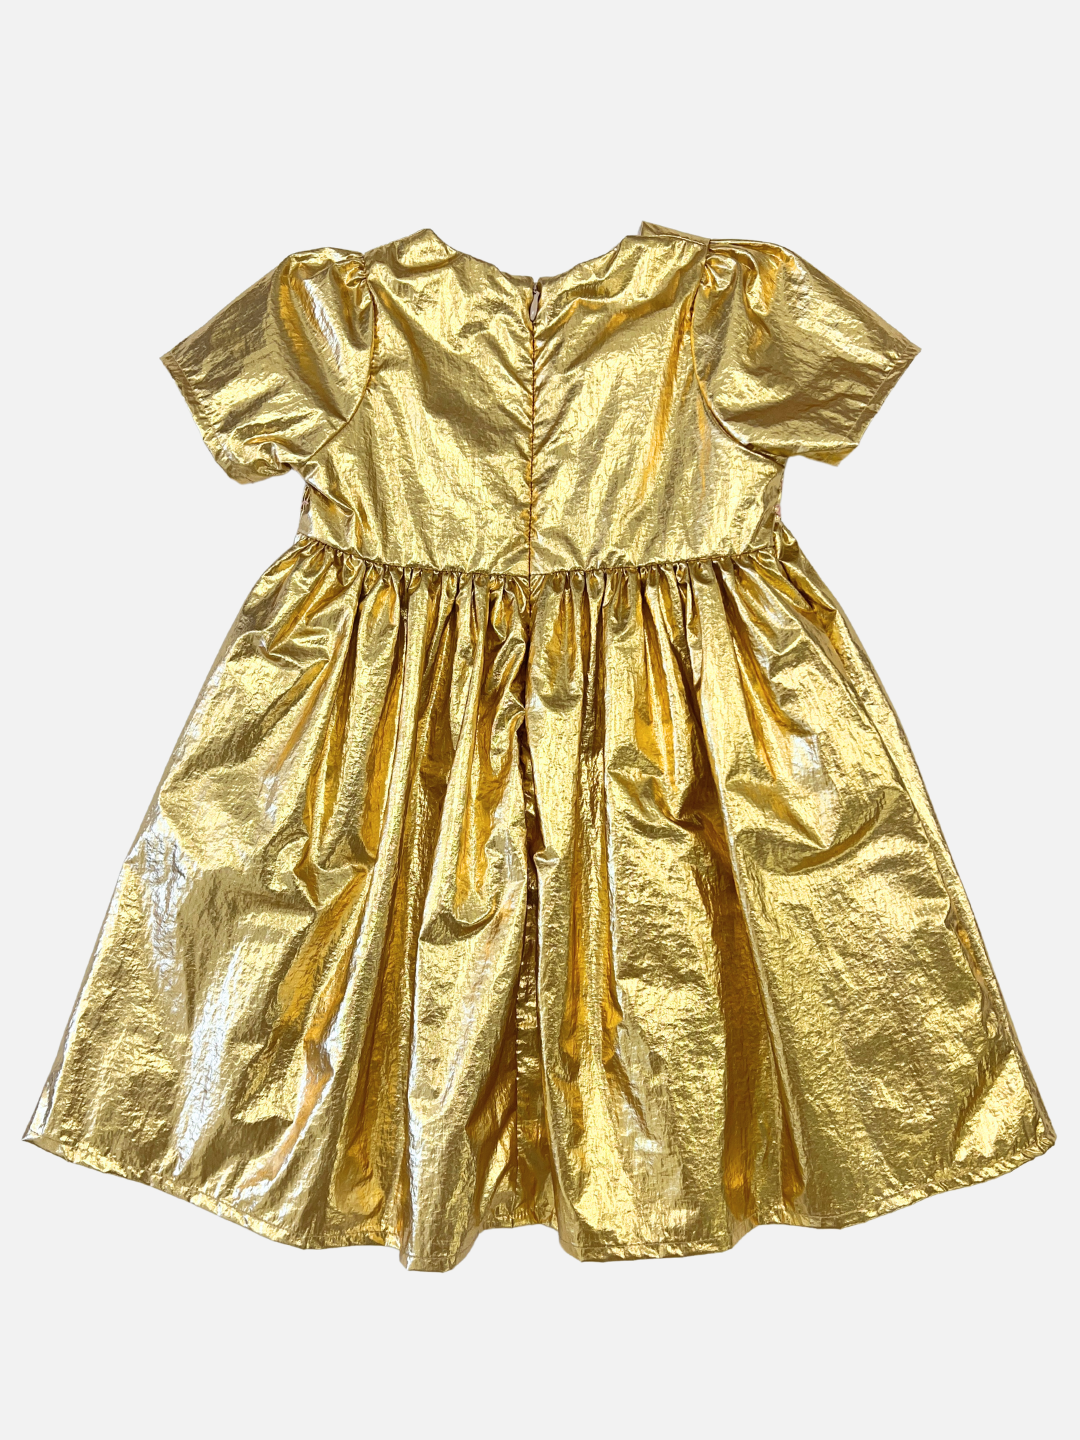 Back view of kids party dress in yellow gold metallic fabric with a round neck, short sleeves, empire waist and full skirt.